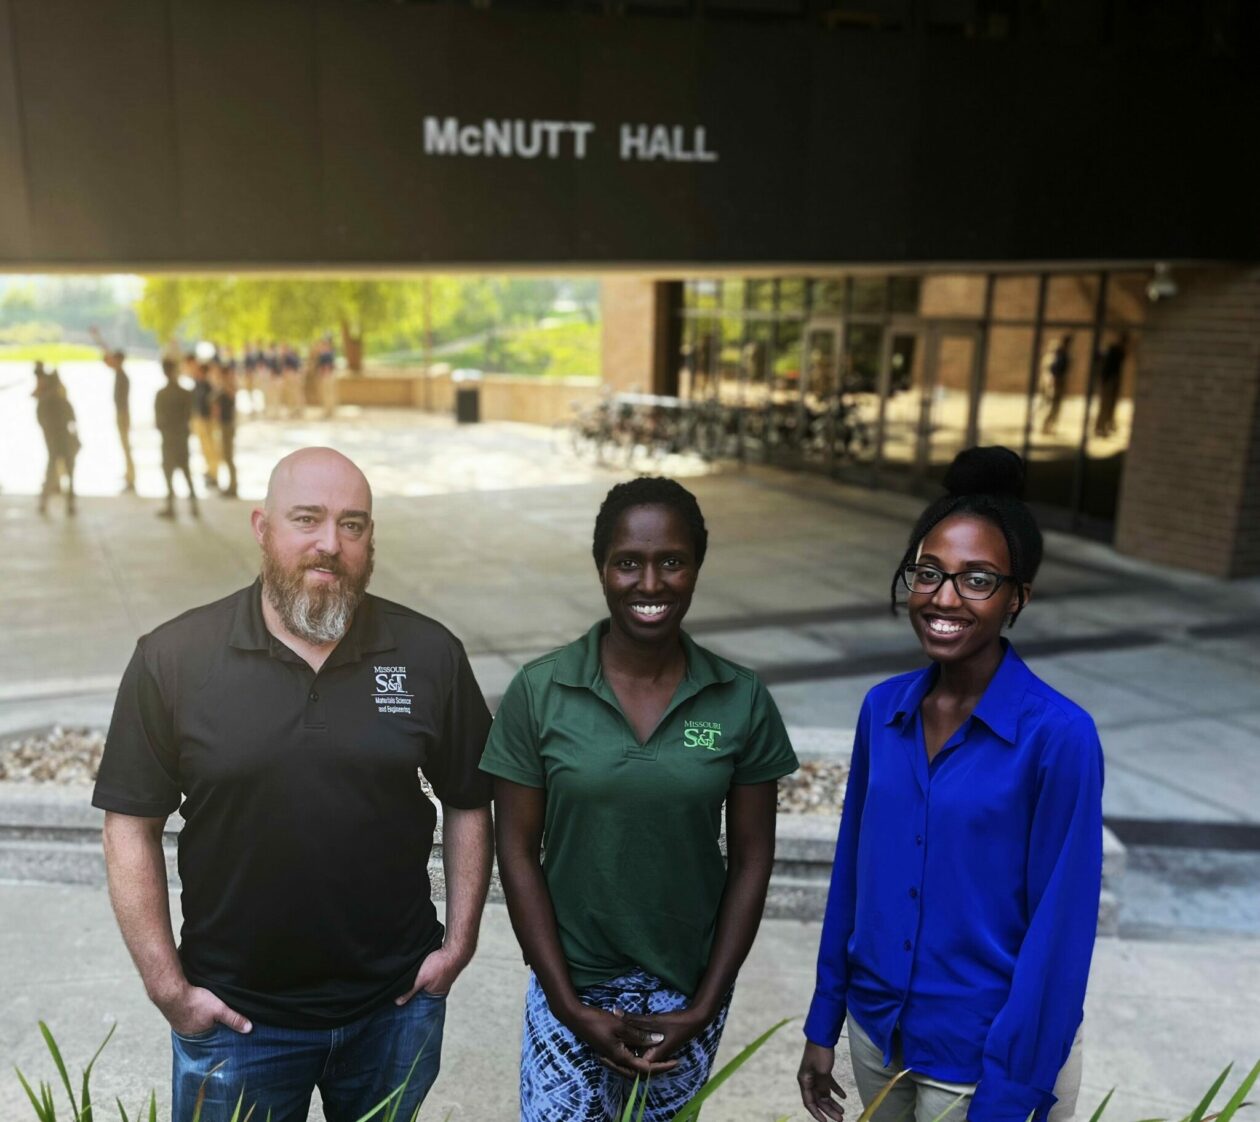 From left, Drs. Jason Lonergan, Charmayne Lonergan and Sharon Uwanyuze recently joined the Missouri S&T faculty. Not pictured is Jackson Hawkins, the new coordinator of the Missouri S&T Glass Shop. Photo by Greg Edwards/Missouri S&T.